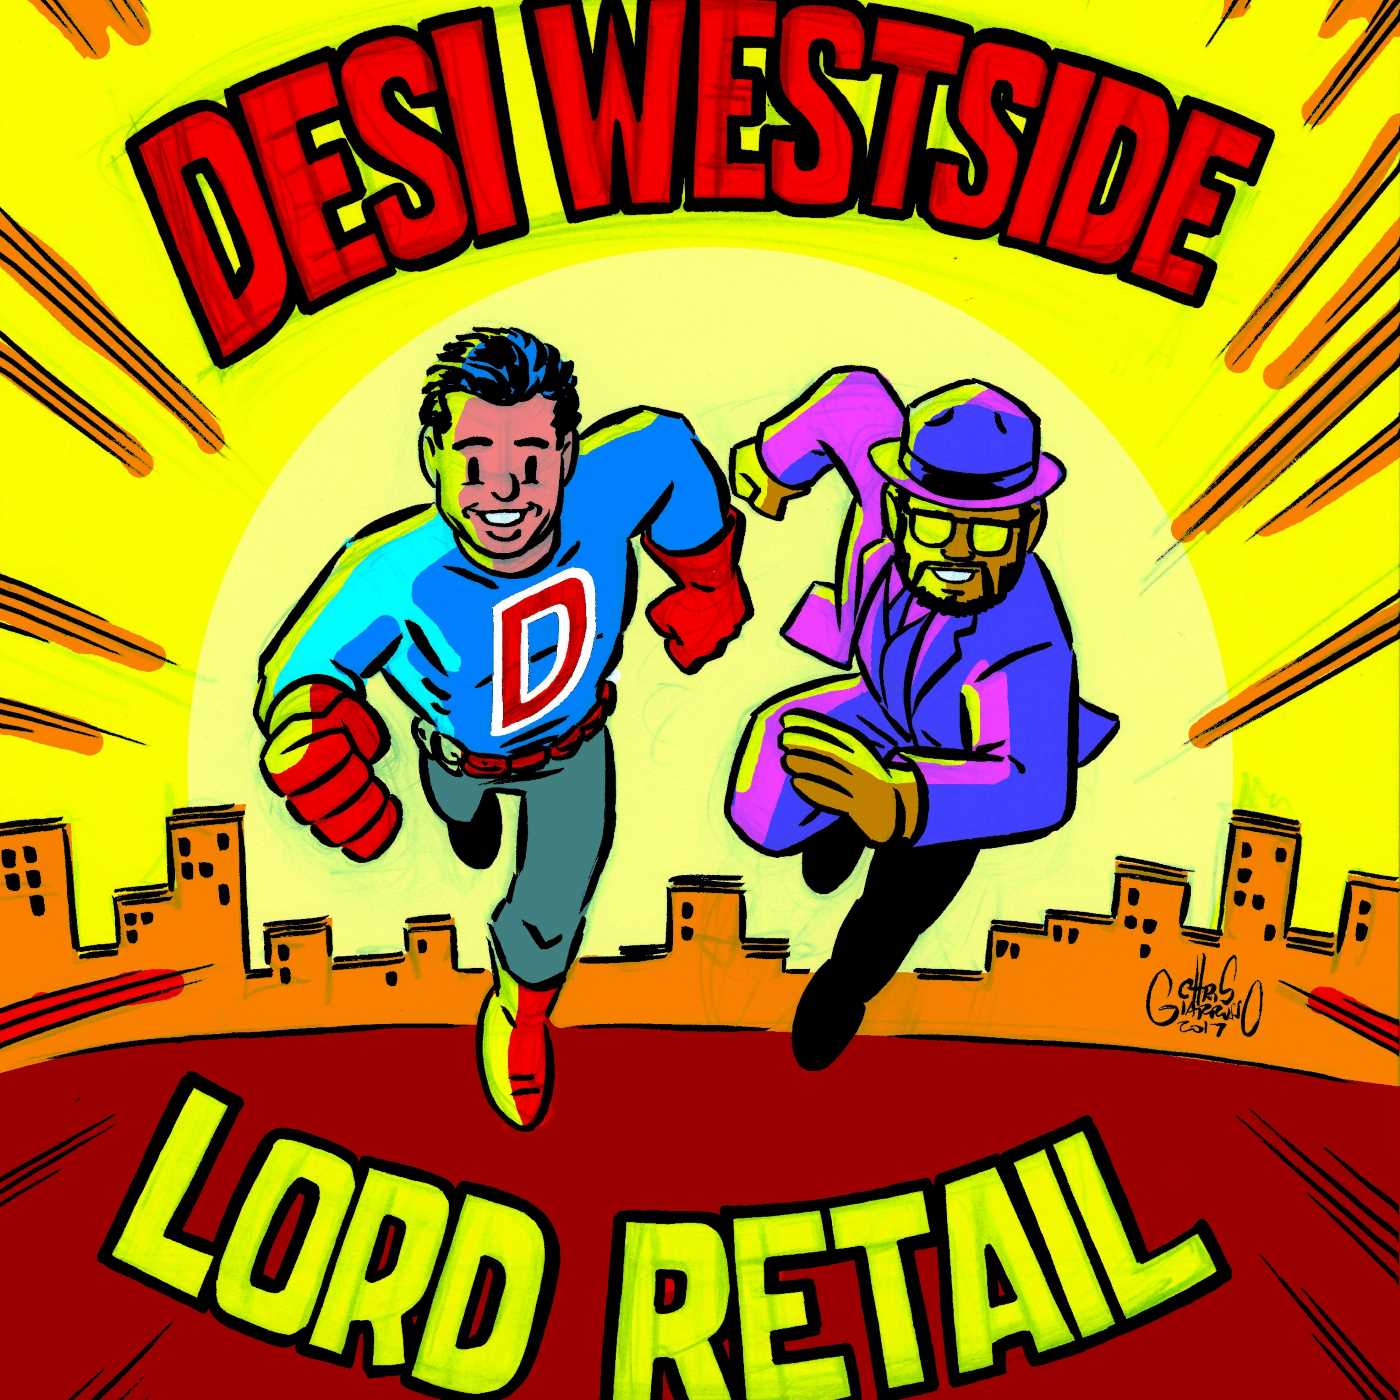 Artwork for podcast My Comic Shop History